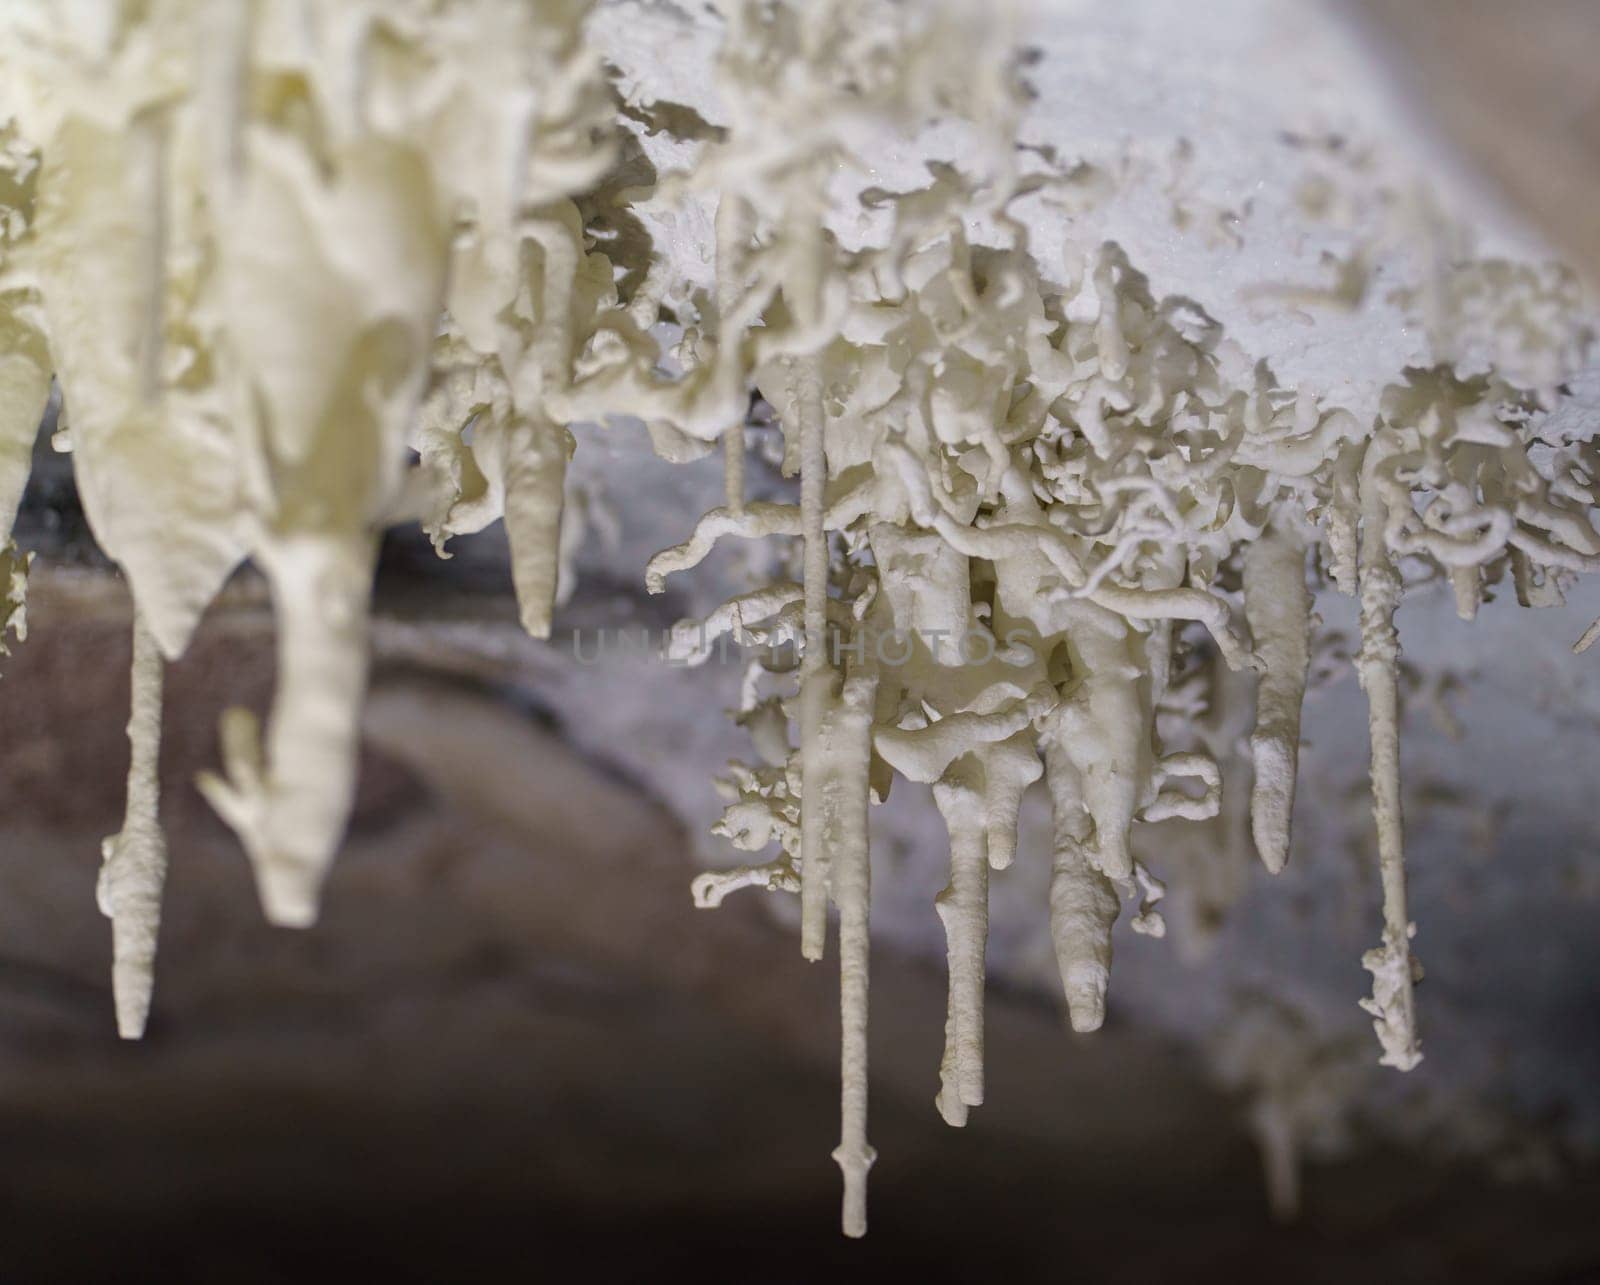 Intricate icicle formation in a cave captured up-close, highlighting the beauty of nature during winter, caused by air currents.